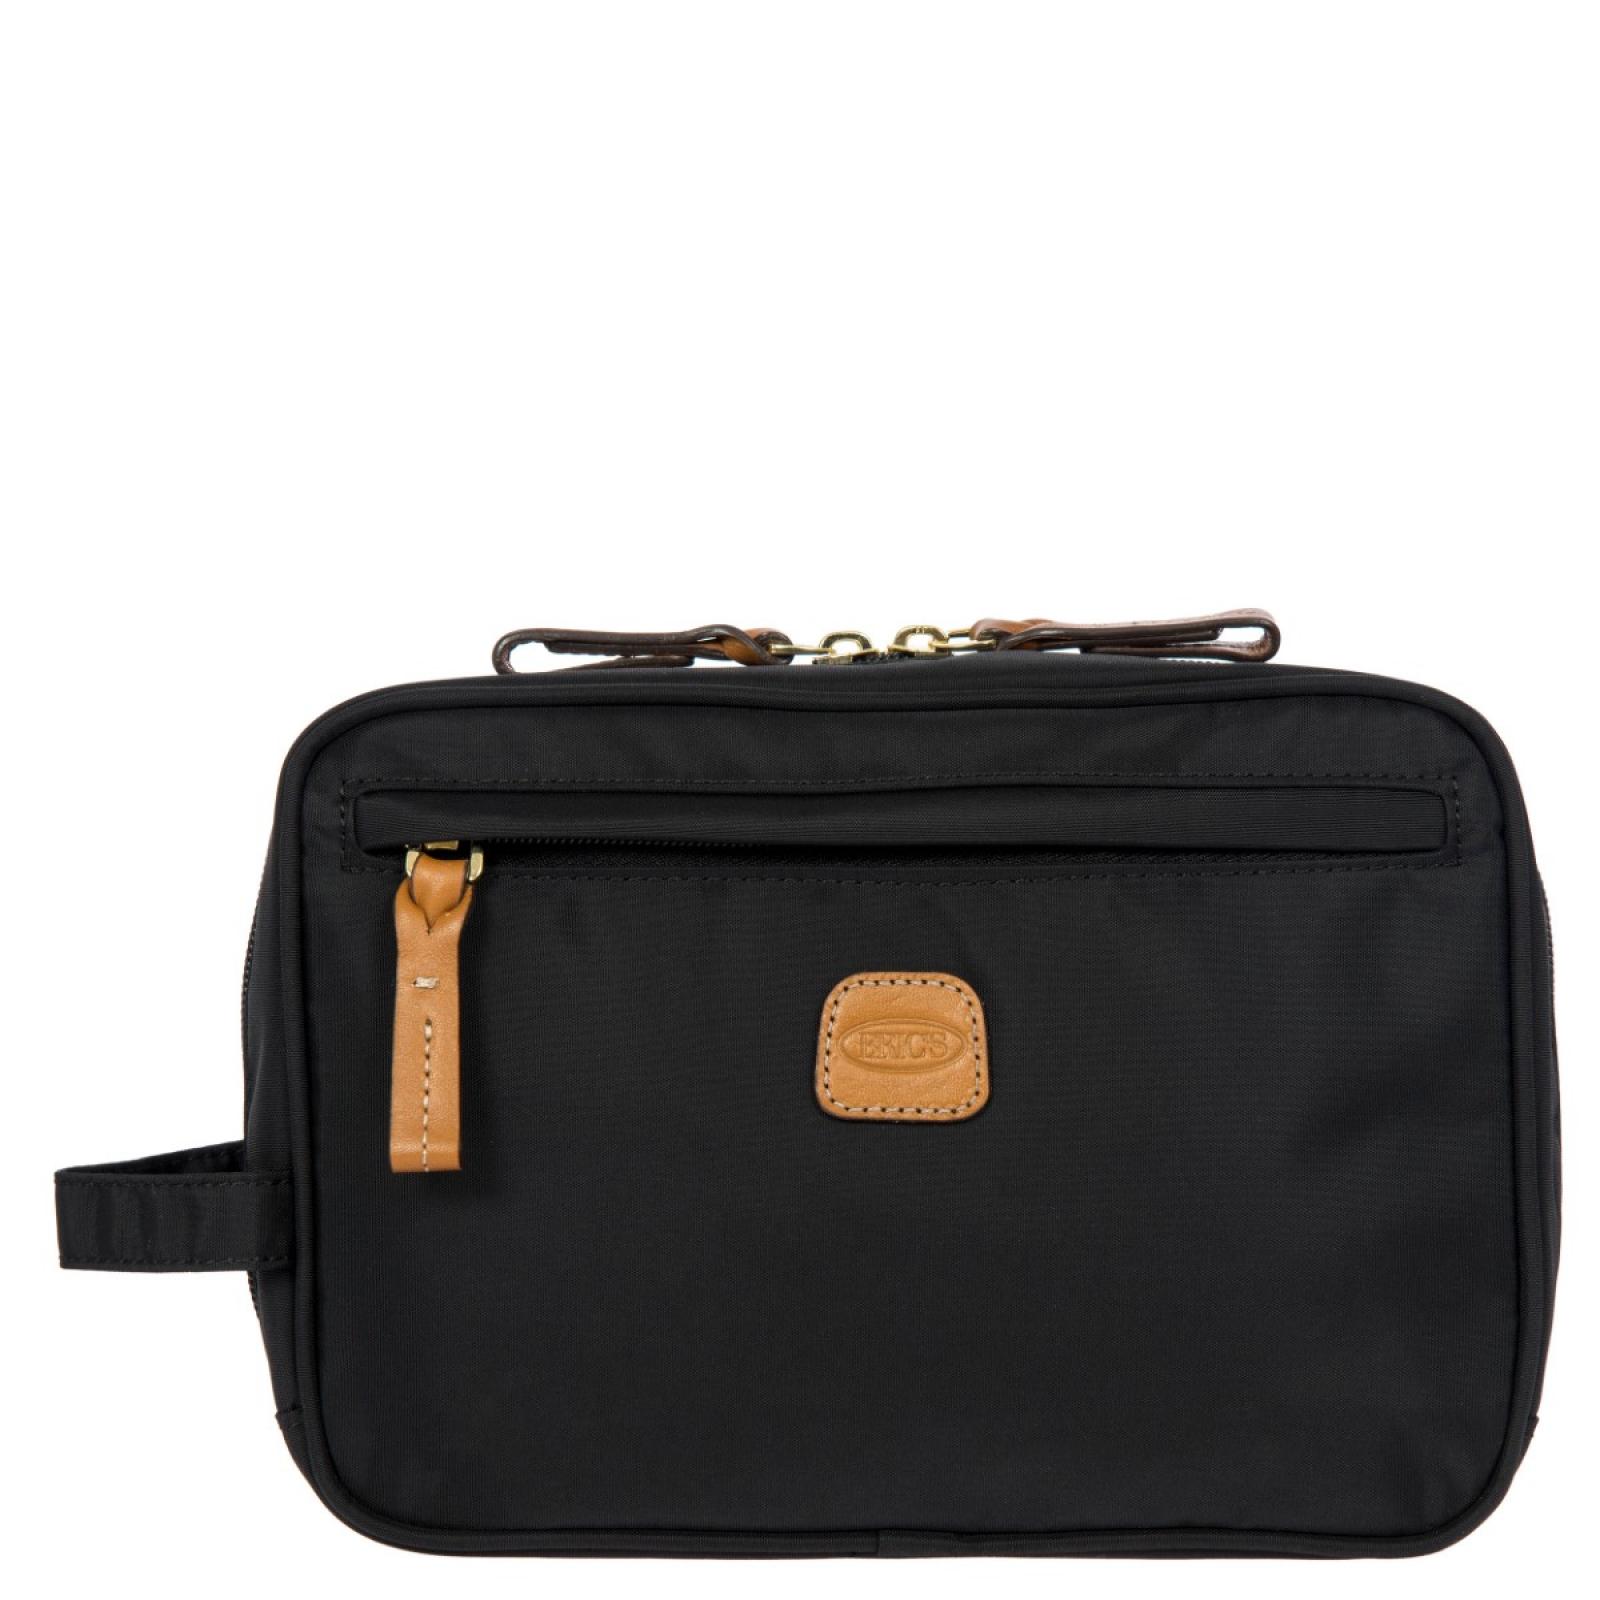 Bric’s: stylish suitcases, bags and travel acessories X-Bag overnight case - 